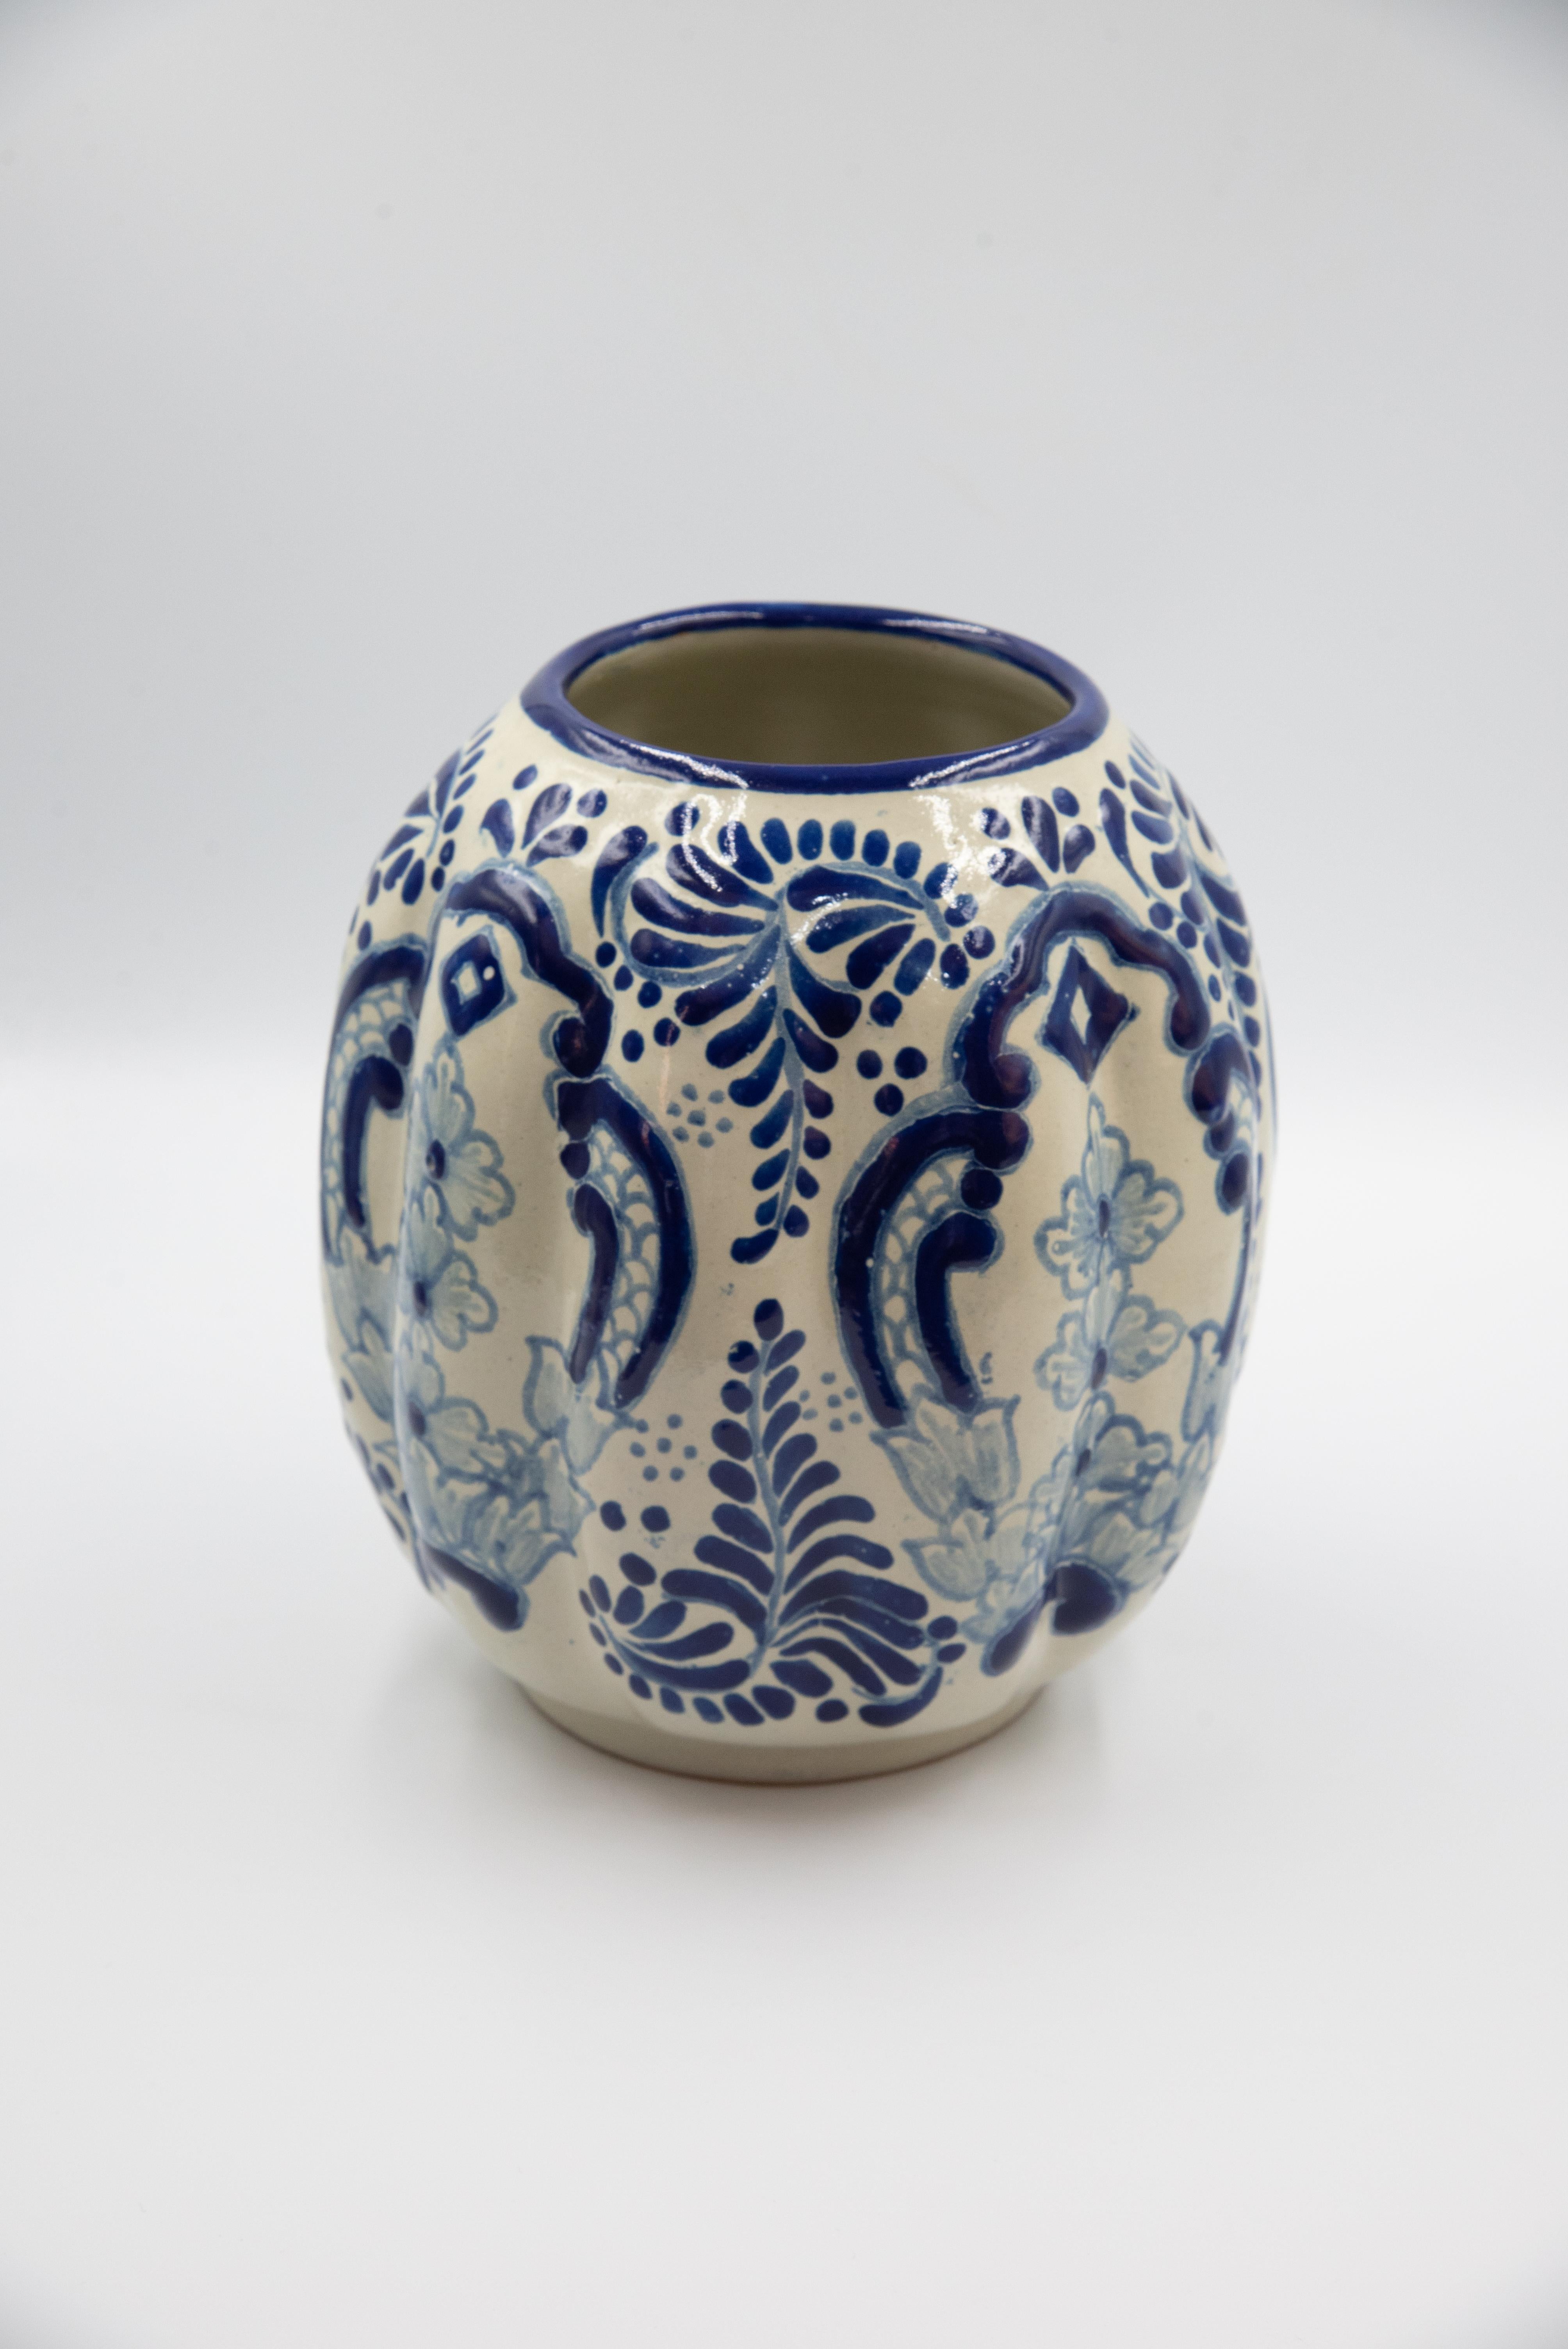 A perfect white and blue flower vase made with the Talavera technique. Artist, Cesar Torres portraits the colonial art of Mexico. 

The Talavera is not just a simple painted ceramic: its exquisite decoration is the product of a delicate process of